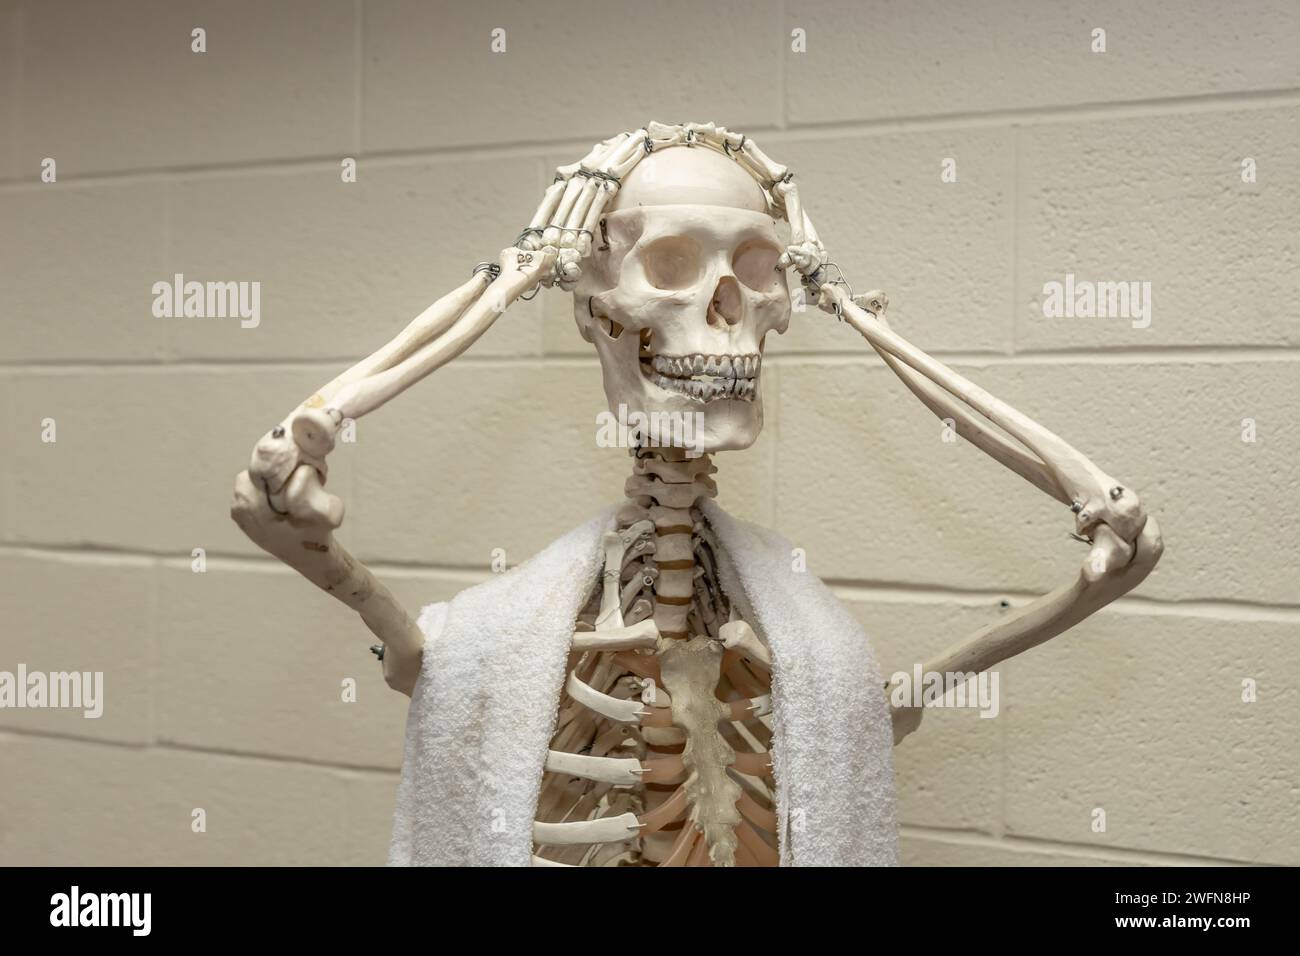 Skeleton with white towel over shoulders and showing emotion with both hands on head as if showing stress, disbelief, or worried. Stock Photo